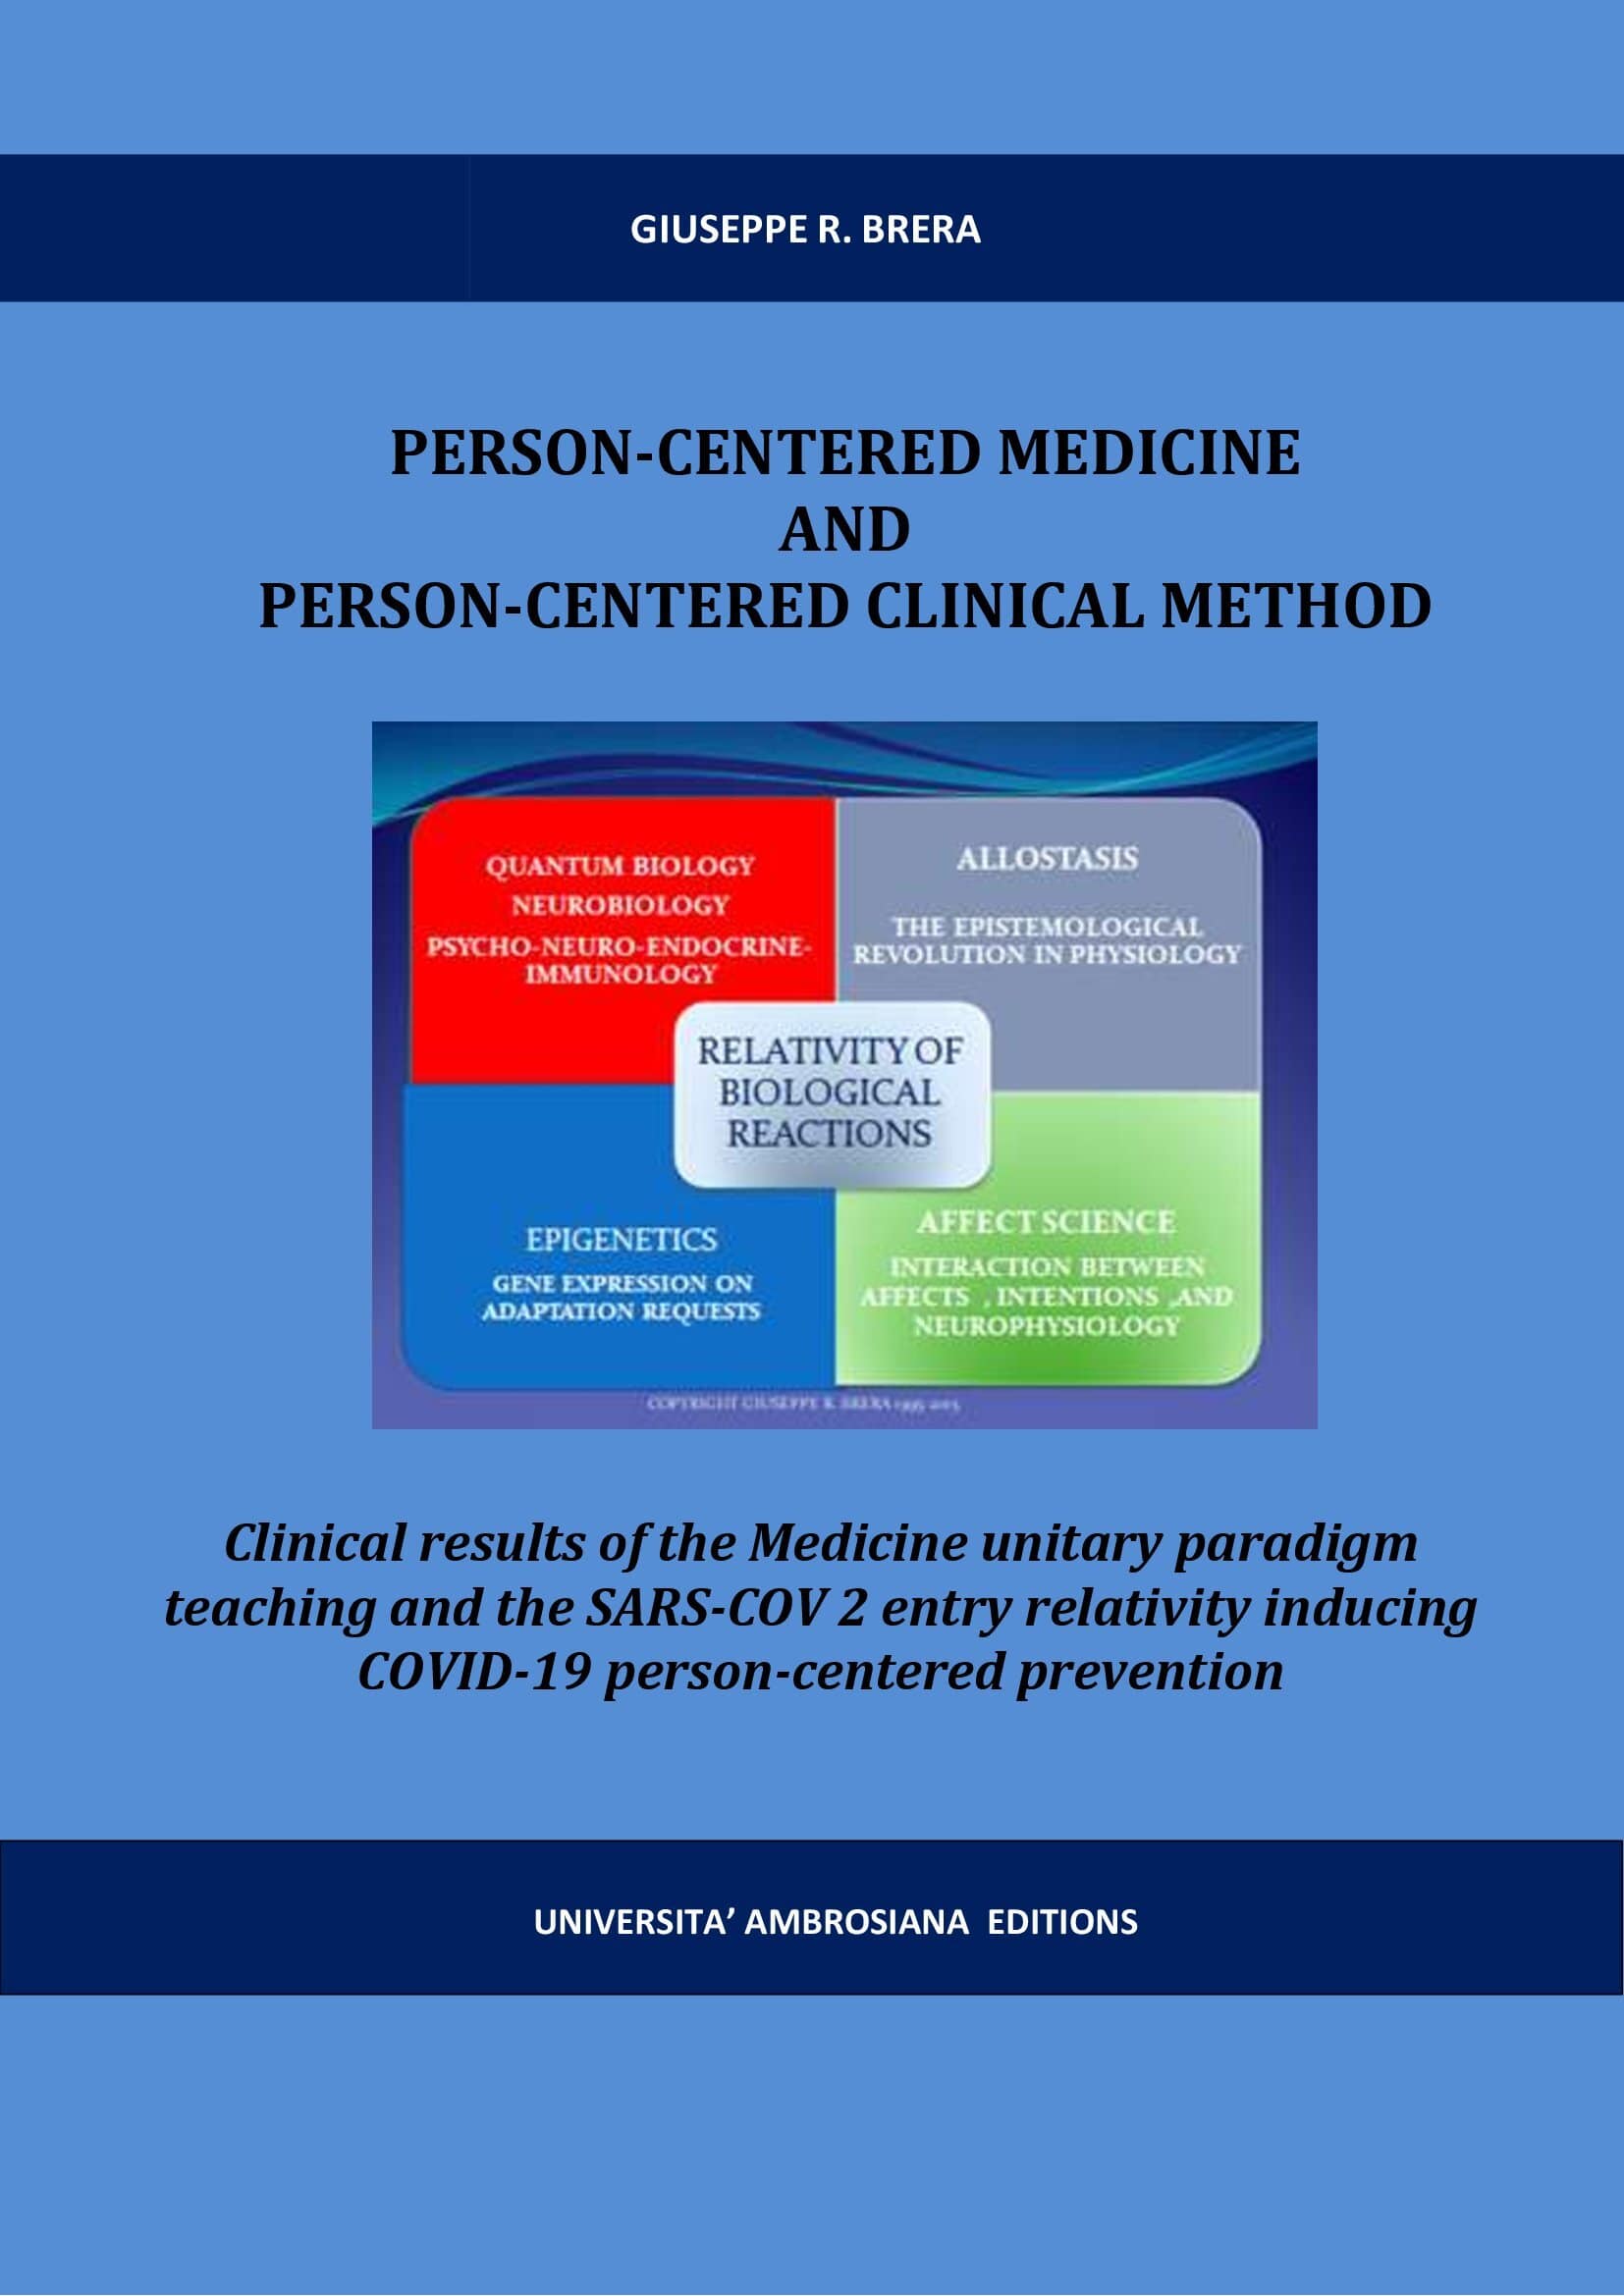 PERSON-CENTERED MEDICINE AND PERSON-CENTERED CLINICAL METHOD